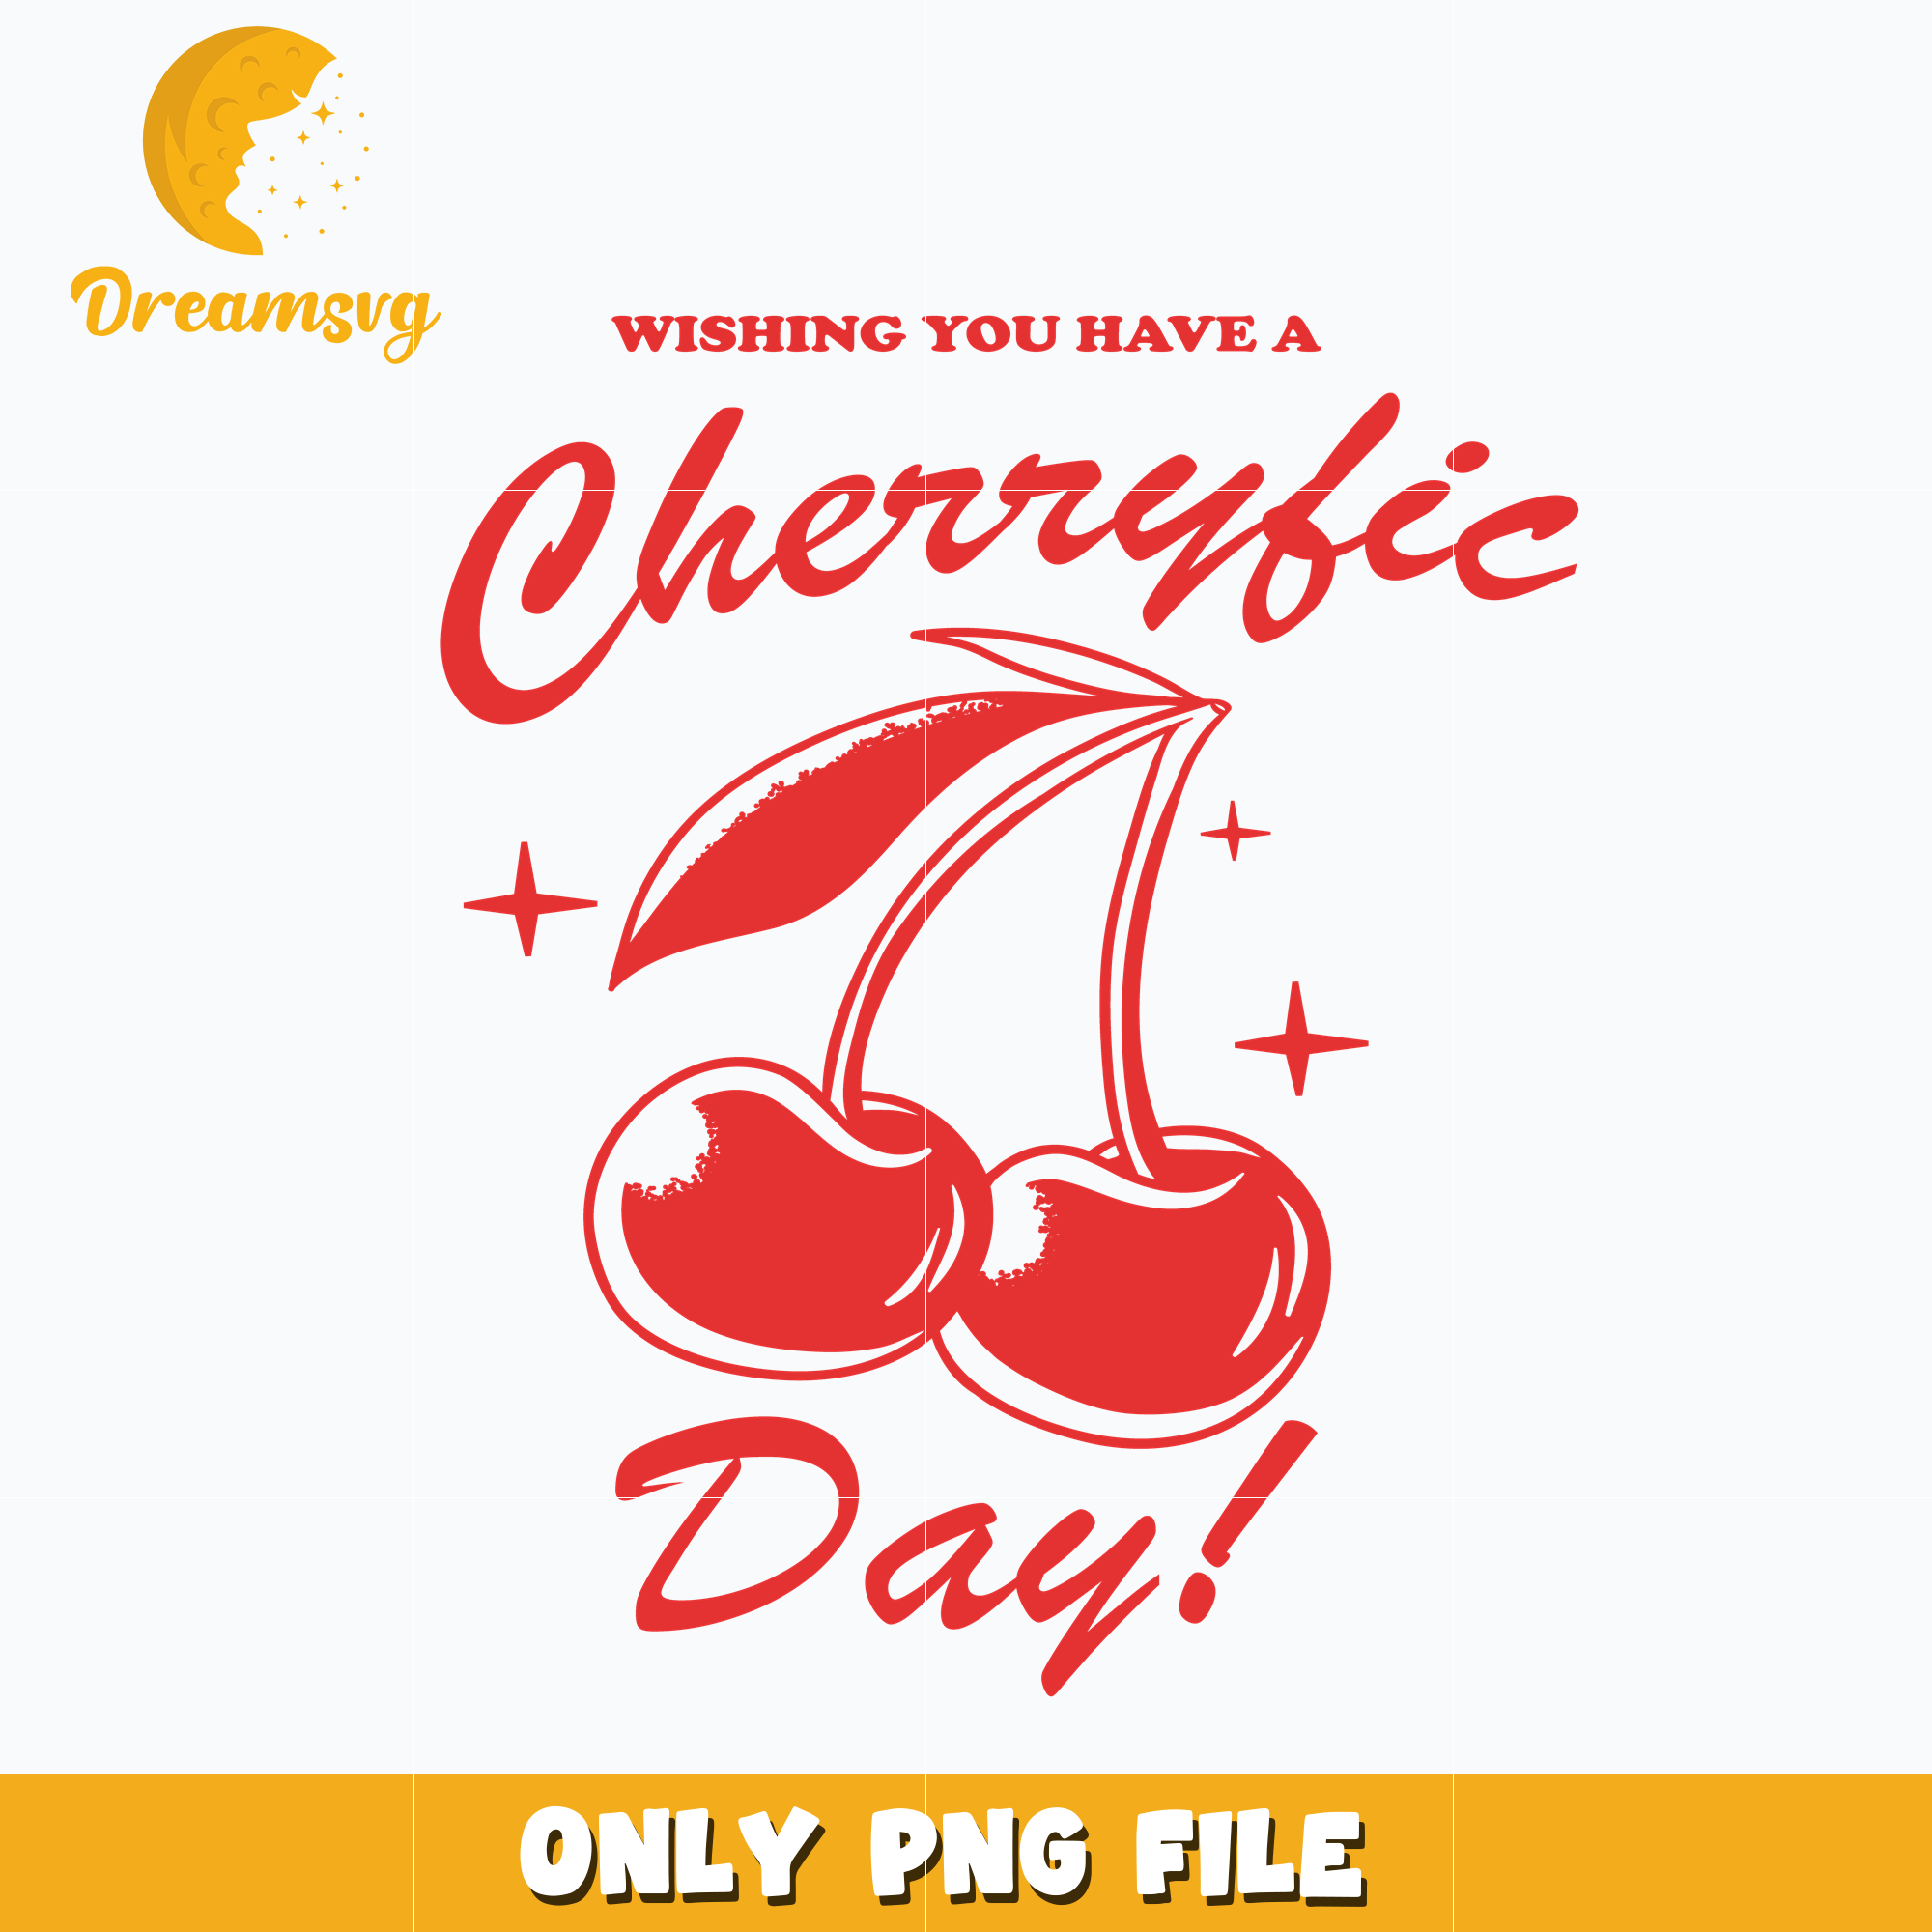 Wishing You Have a Cherryfic Day png